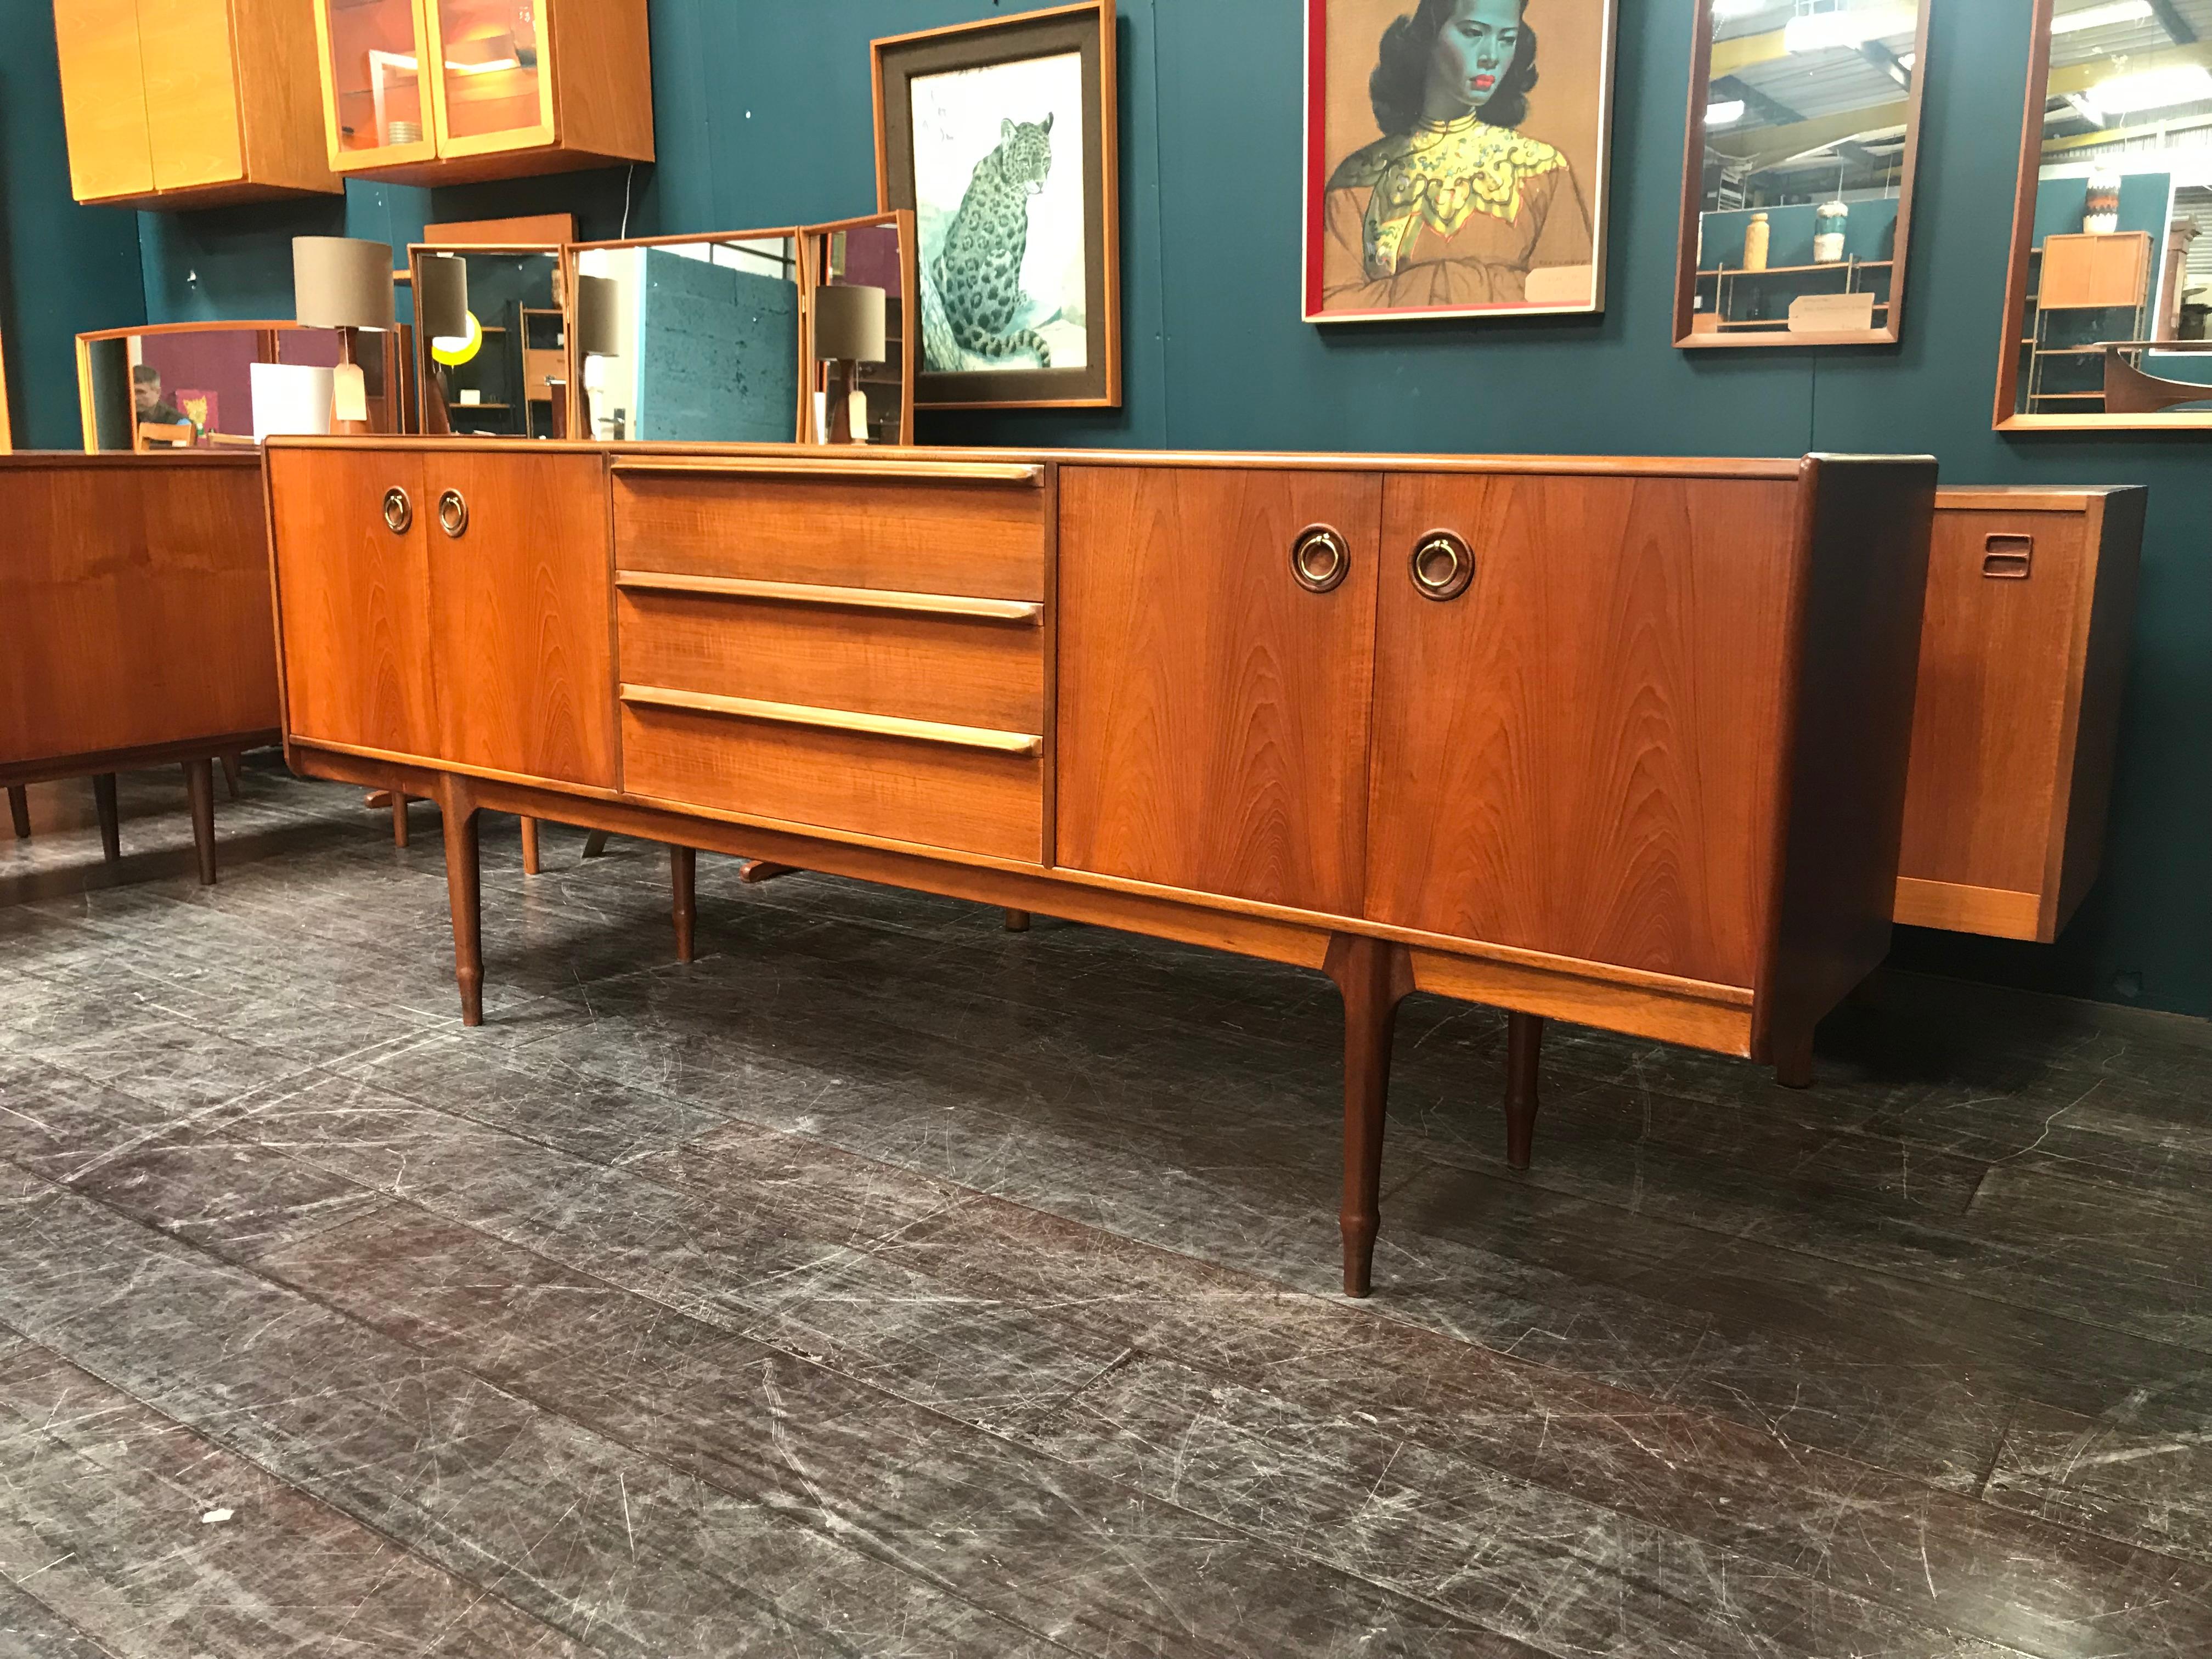 A vintage teak sideboard designed by Tom Robertson and manufactured by A.H. McIntosh of Kirkcaldy. This is a rarely found piece of midcentury Scottish furniture and features extensive storage. The sideboard has two shelved double cupboards that sit